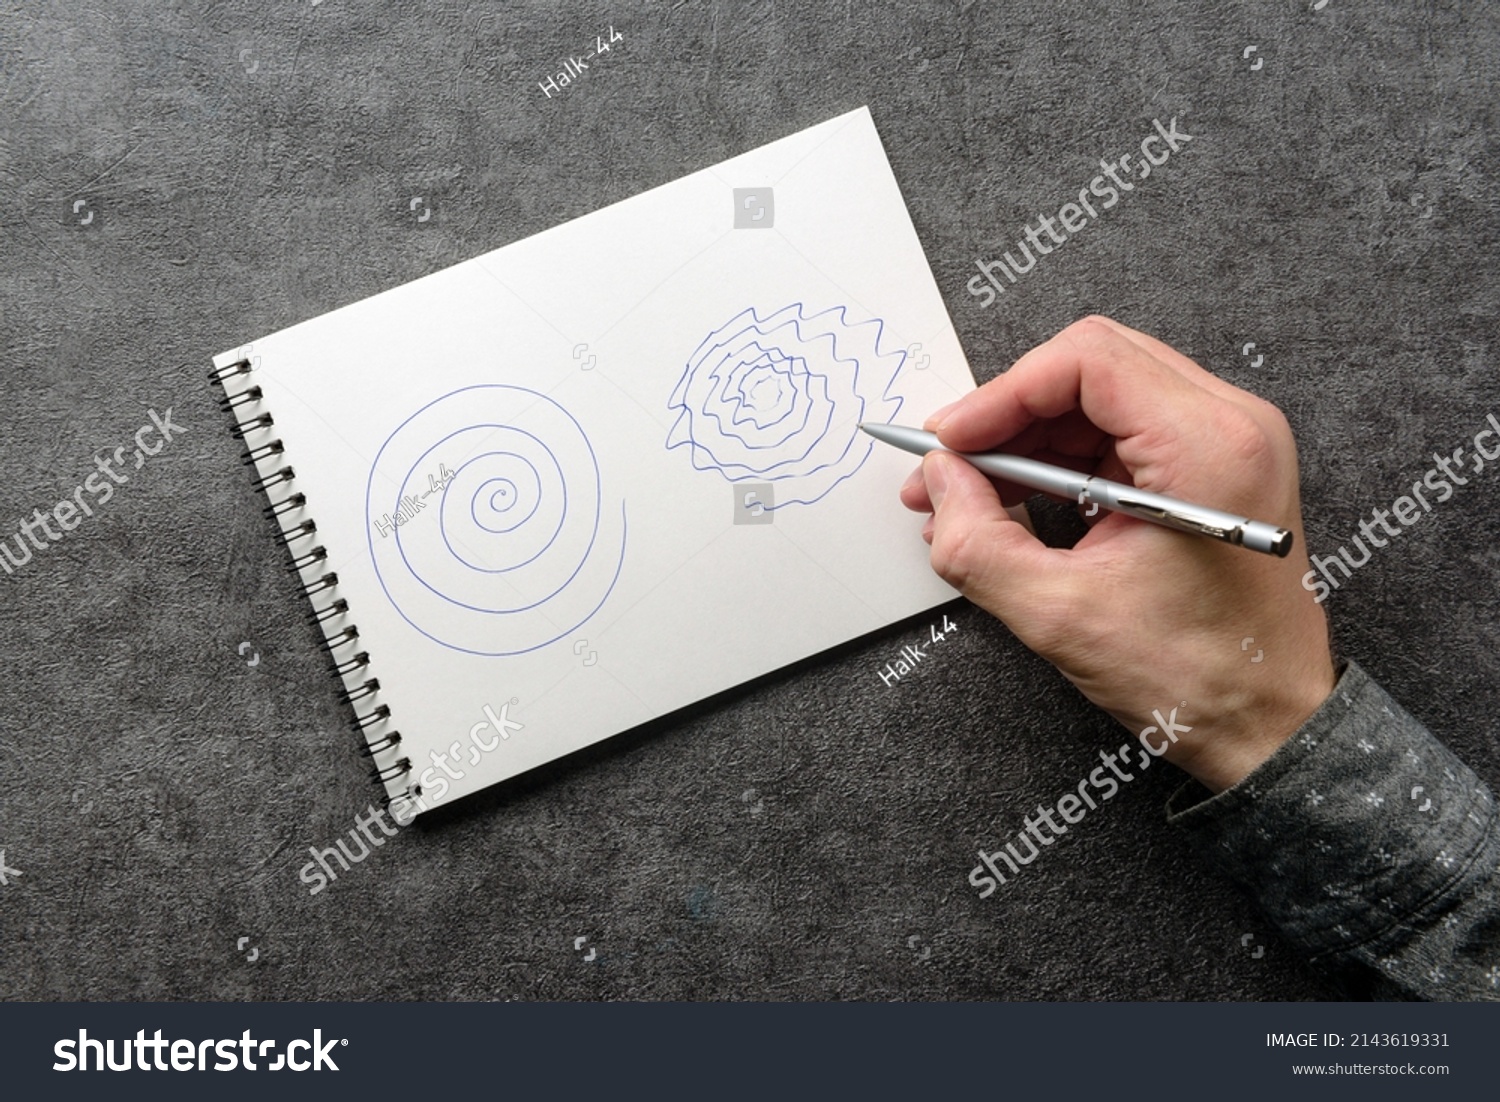 A man with trembling hands is trying to repeat the spiral drawing in a notebook. Test for essential tremor and parkinson's disease. #2143619331